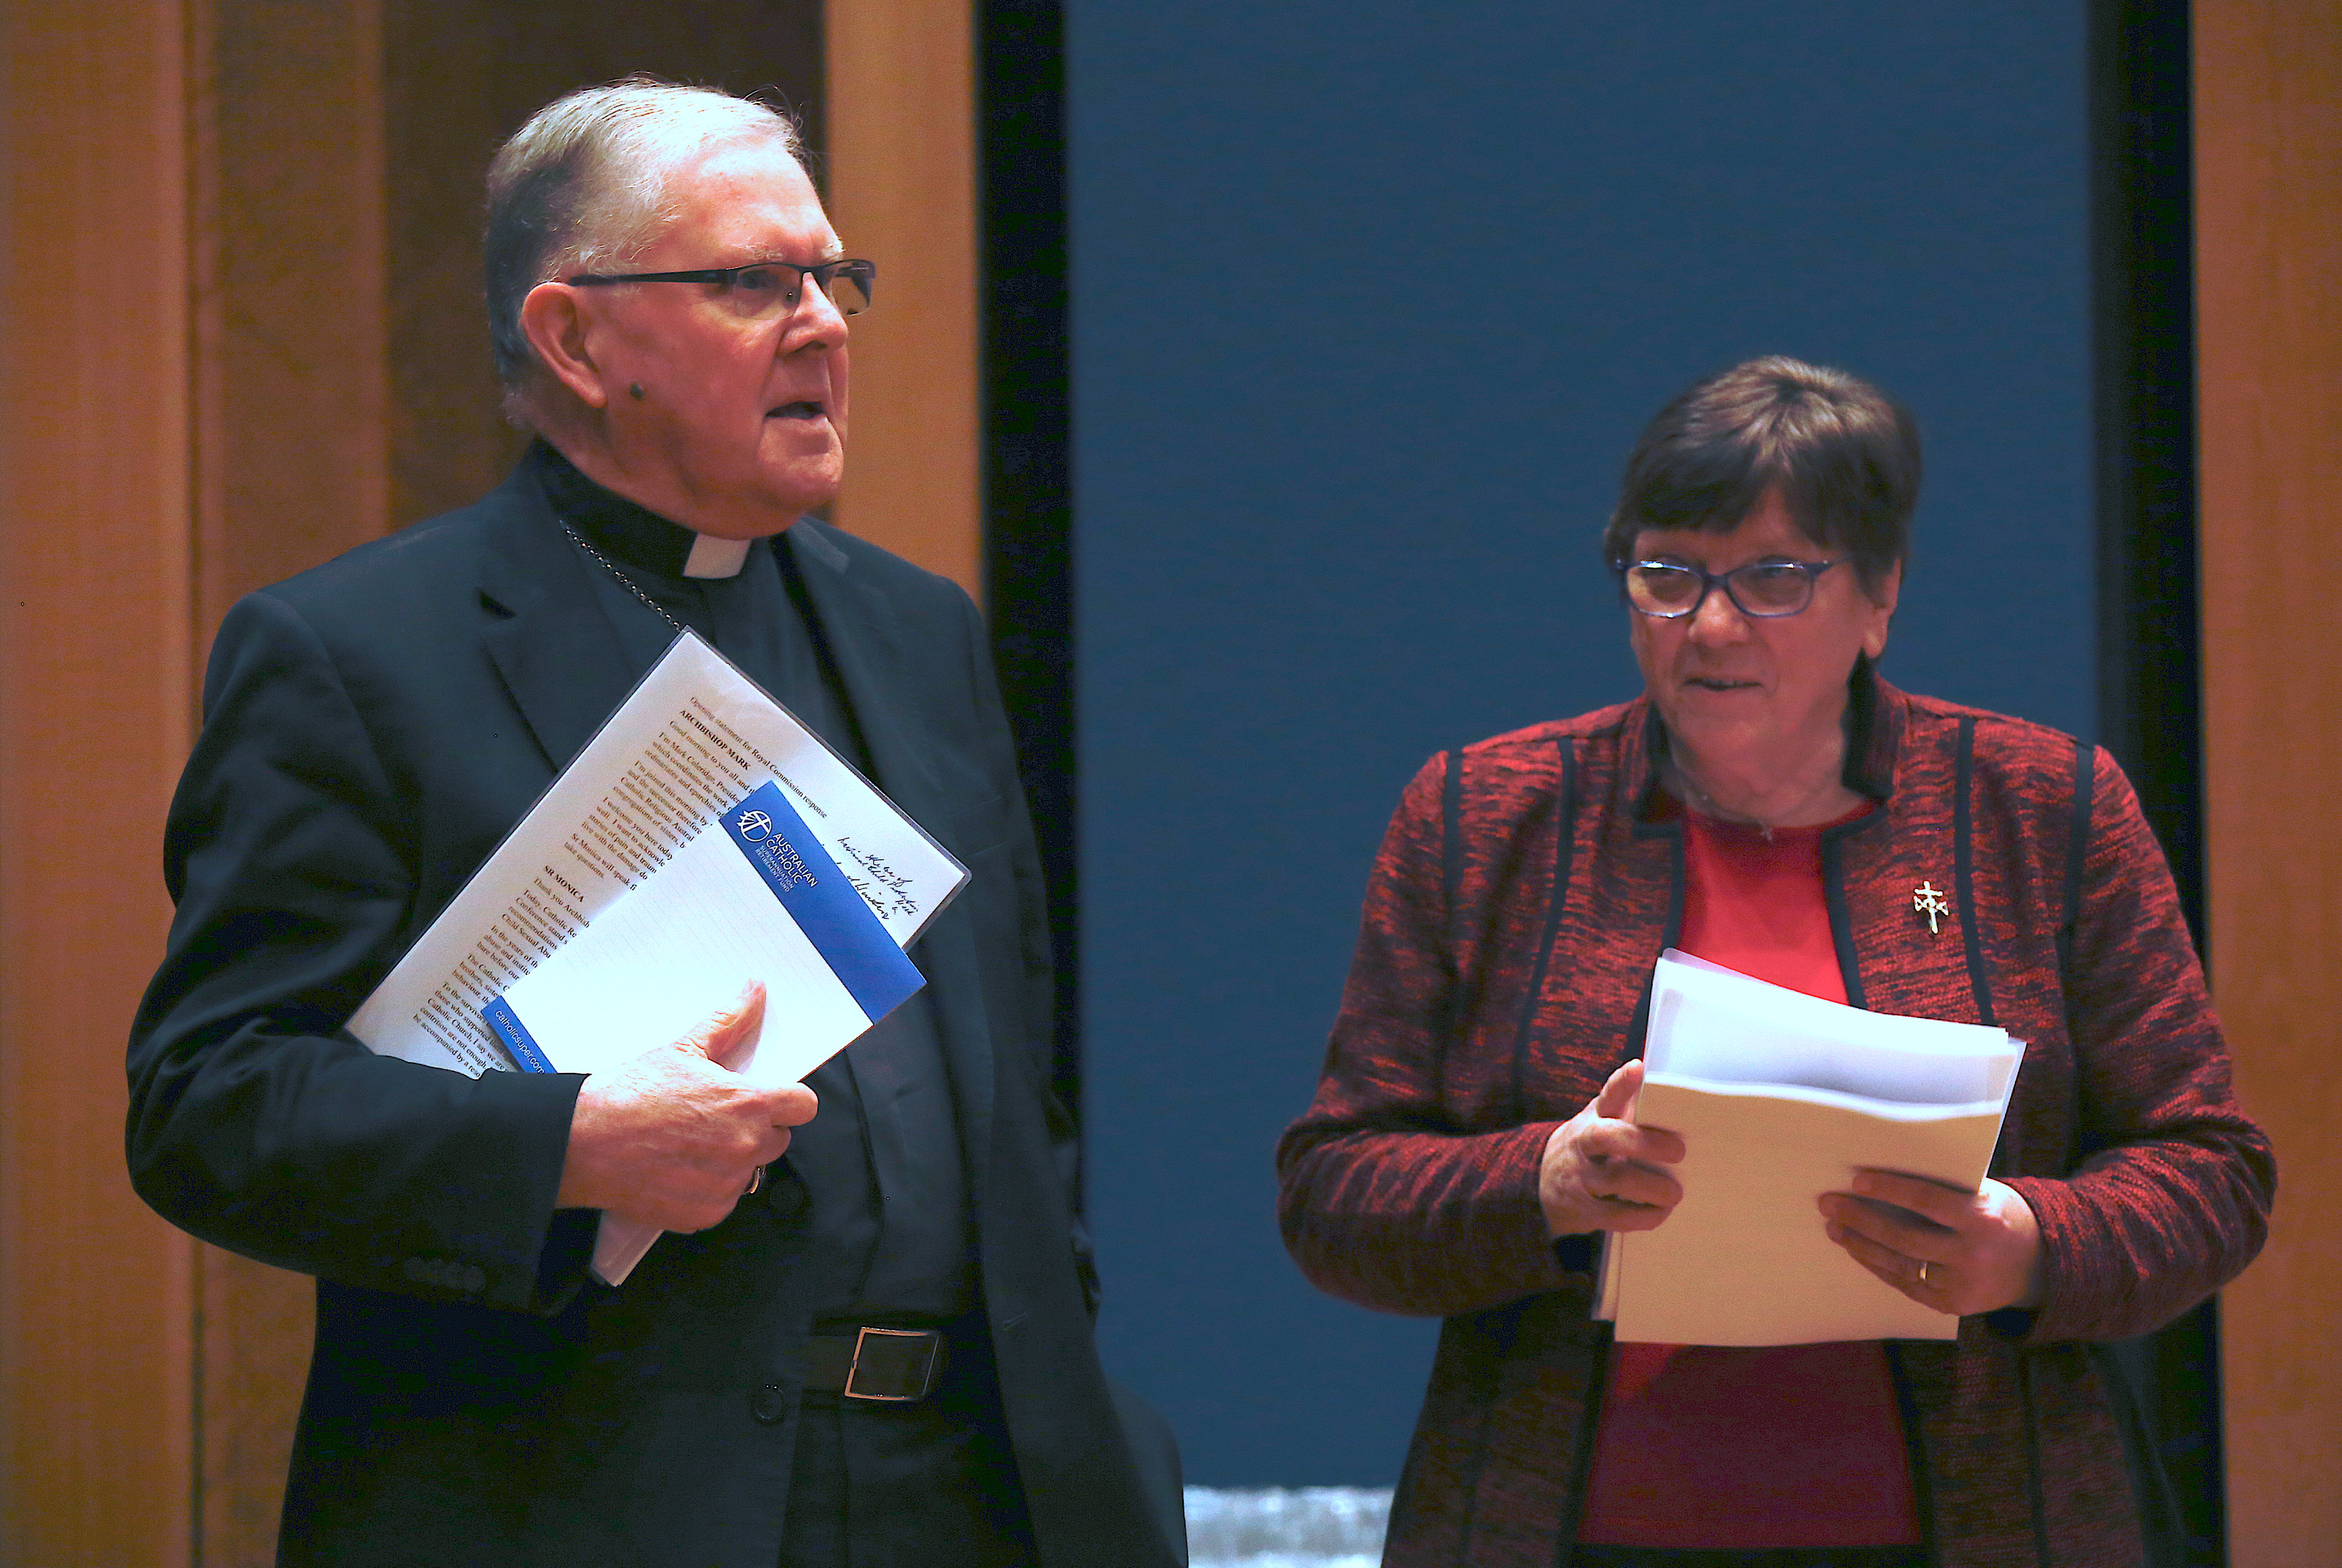 Australian Catholic Church releases standards for child protection